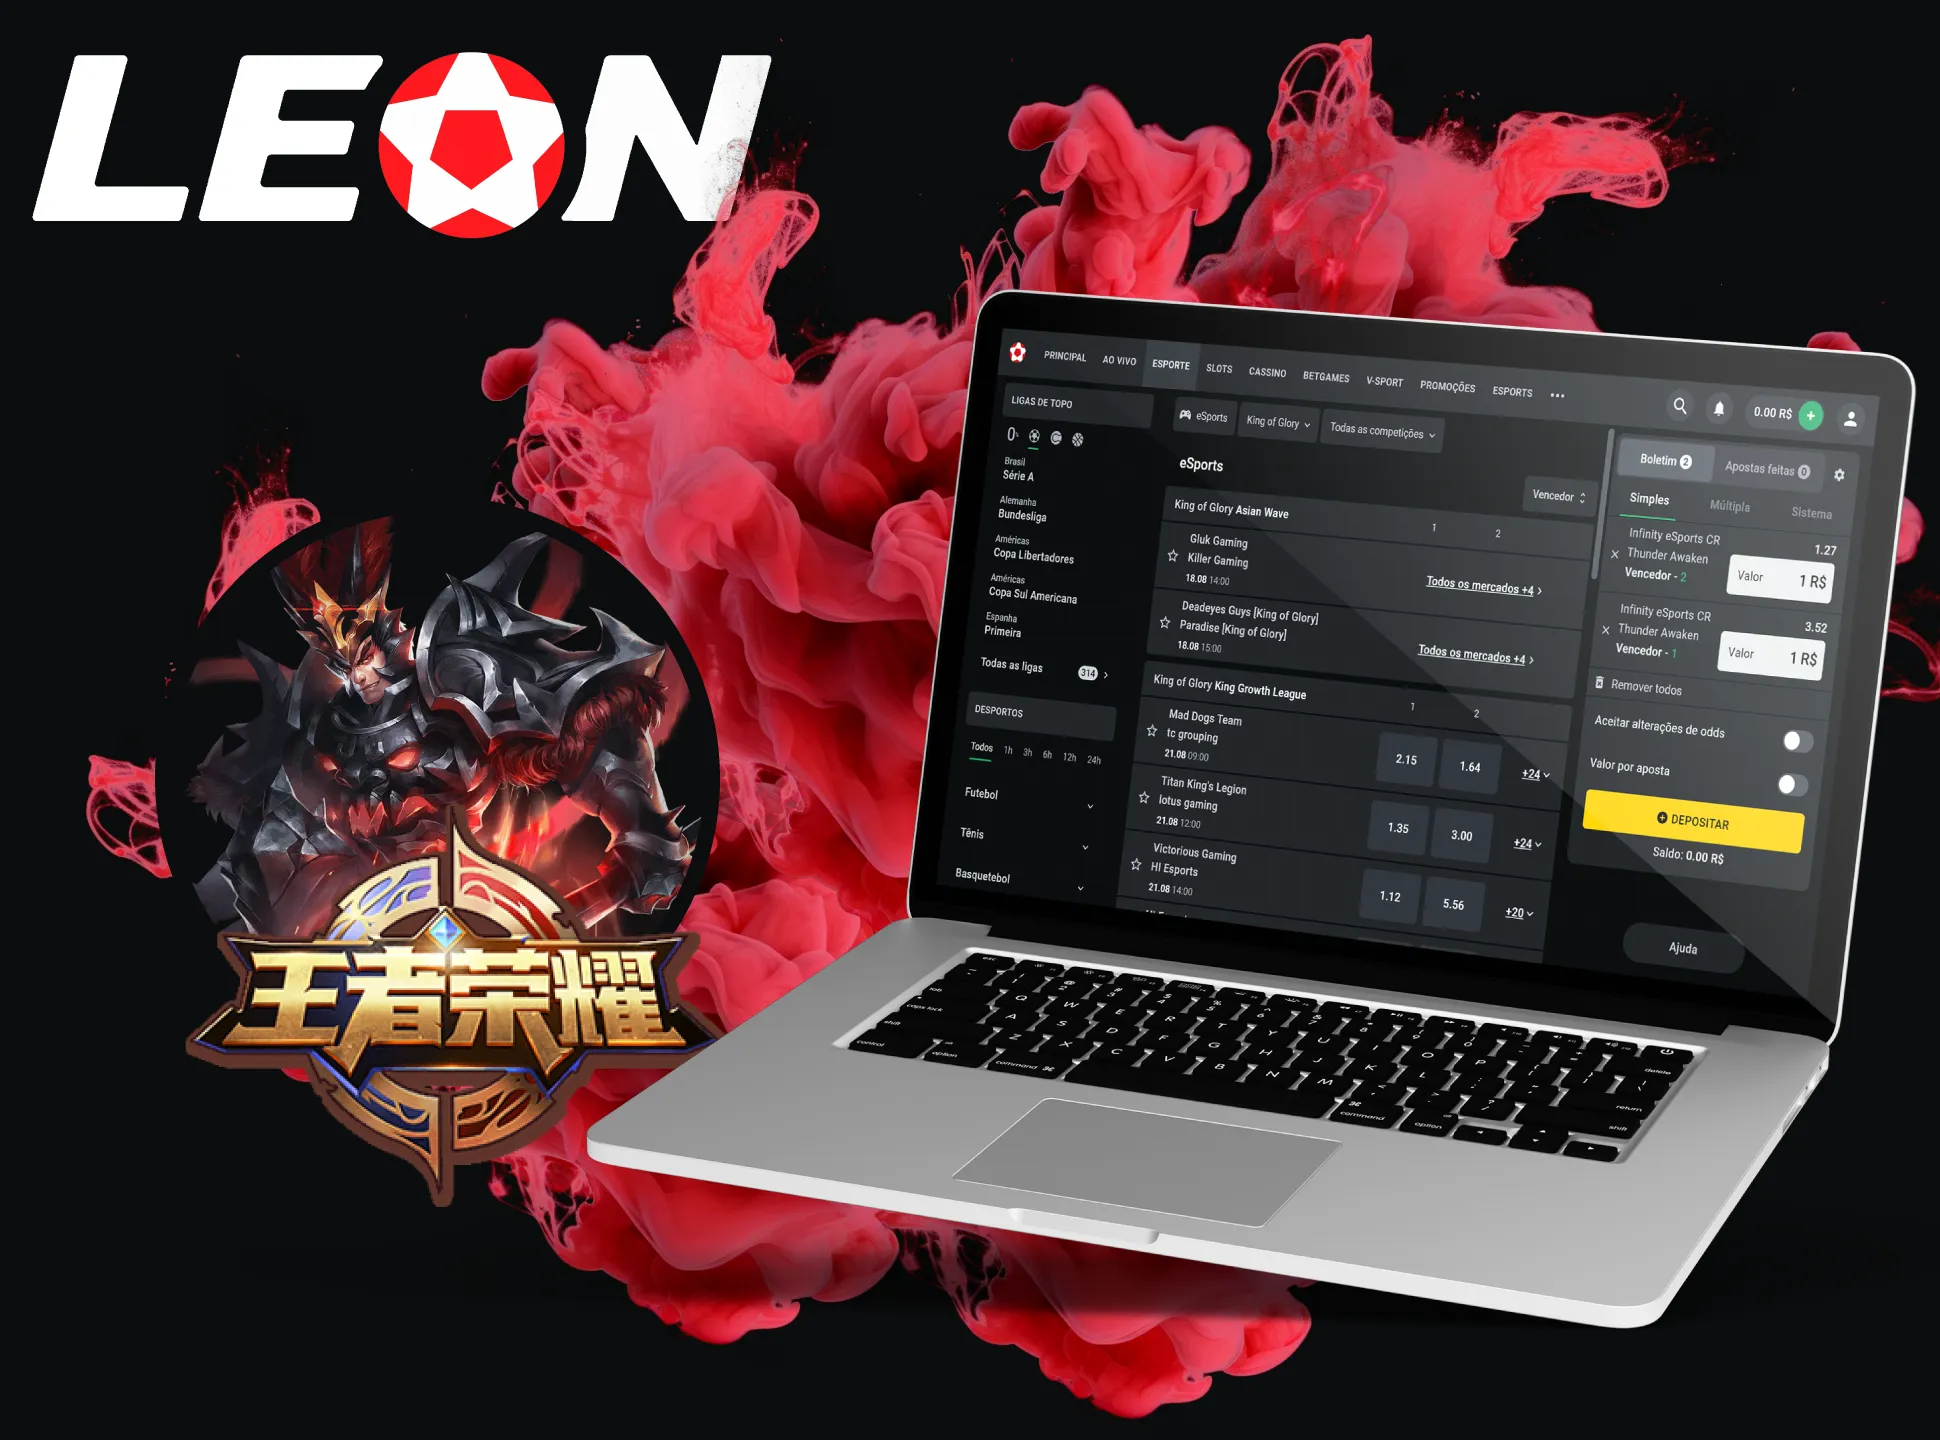 A global game that has won the hearts of users all over the world and was developed in China is available at Leon Bet.